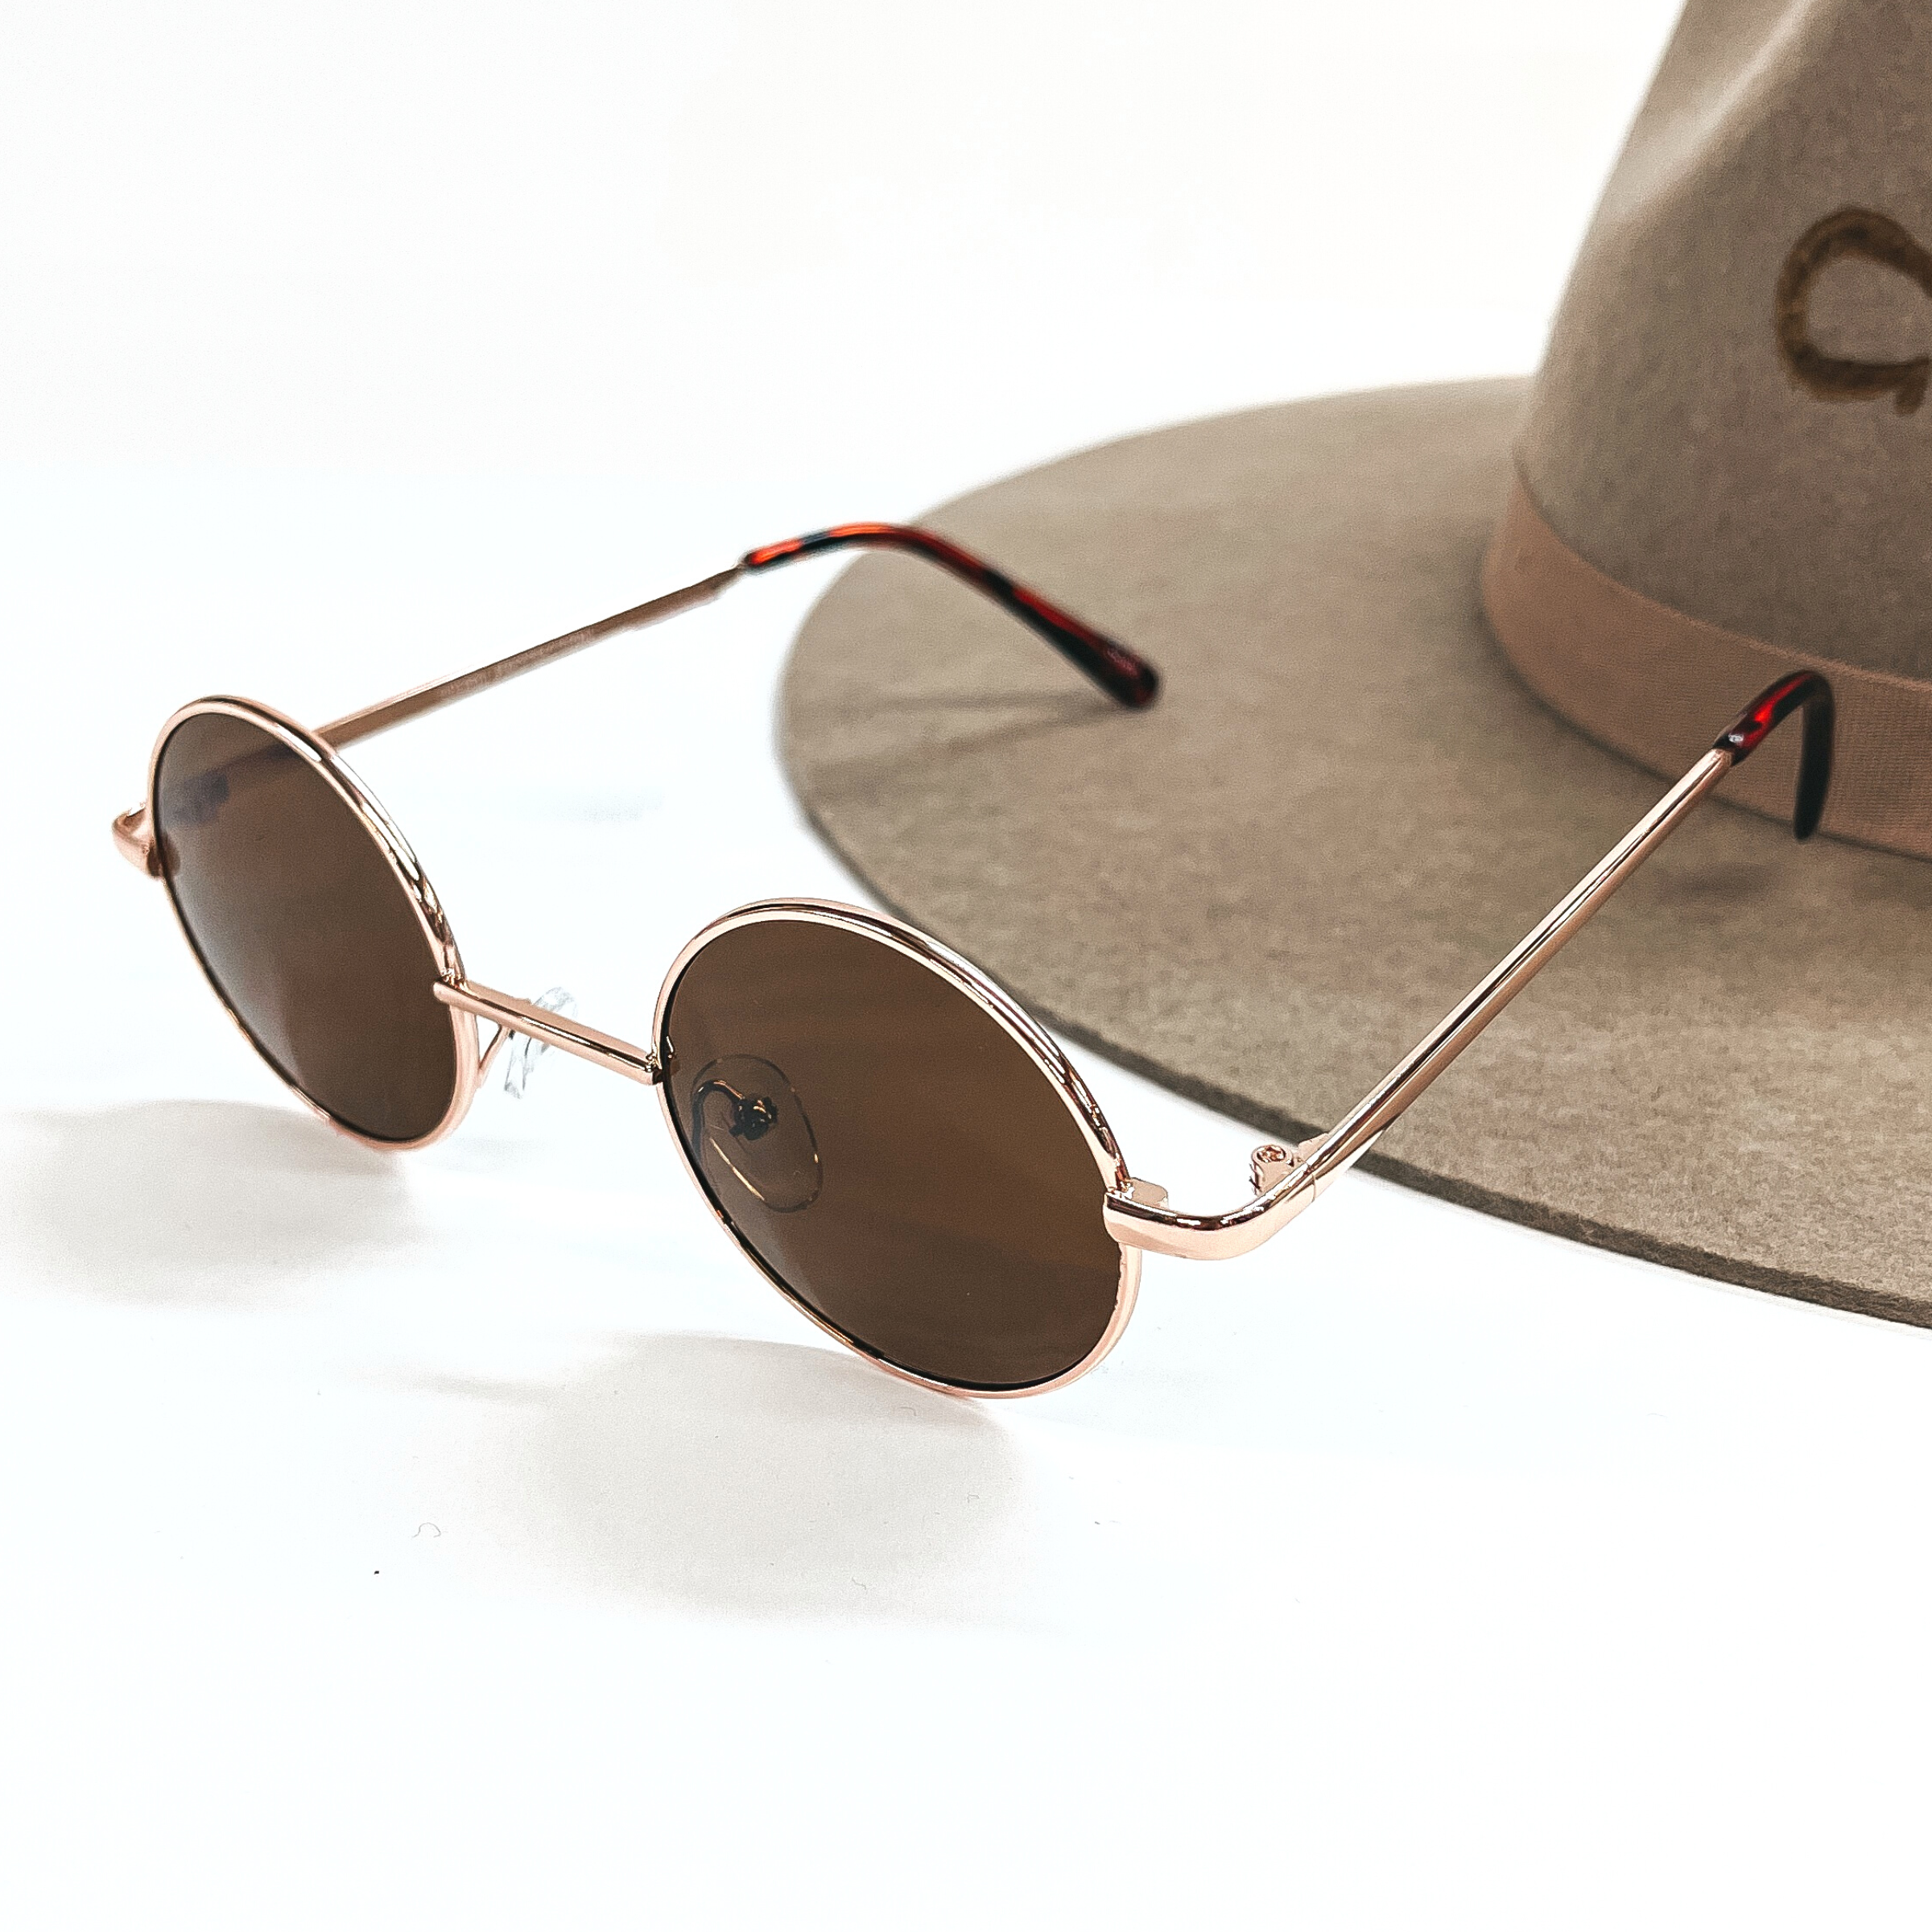 These are small circle sunglasses with brown lenses and a  rose gold outline/frame.  These sunglasses are taken on a a white background and on a brown  felt hat brim.